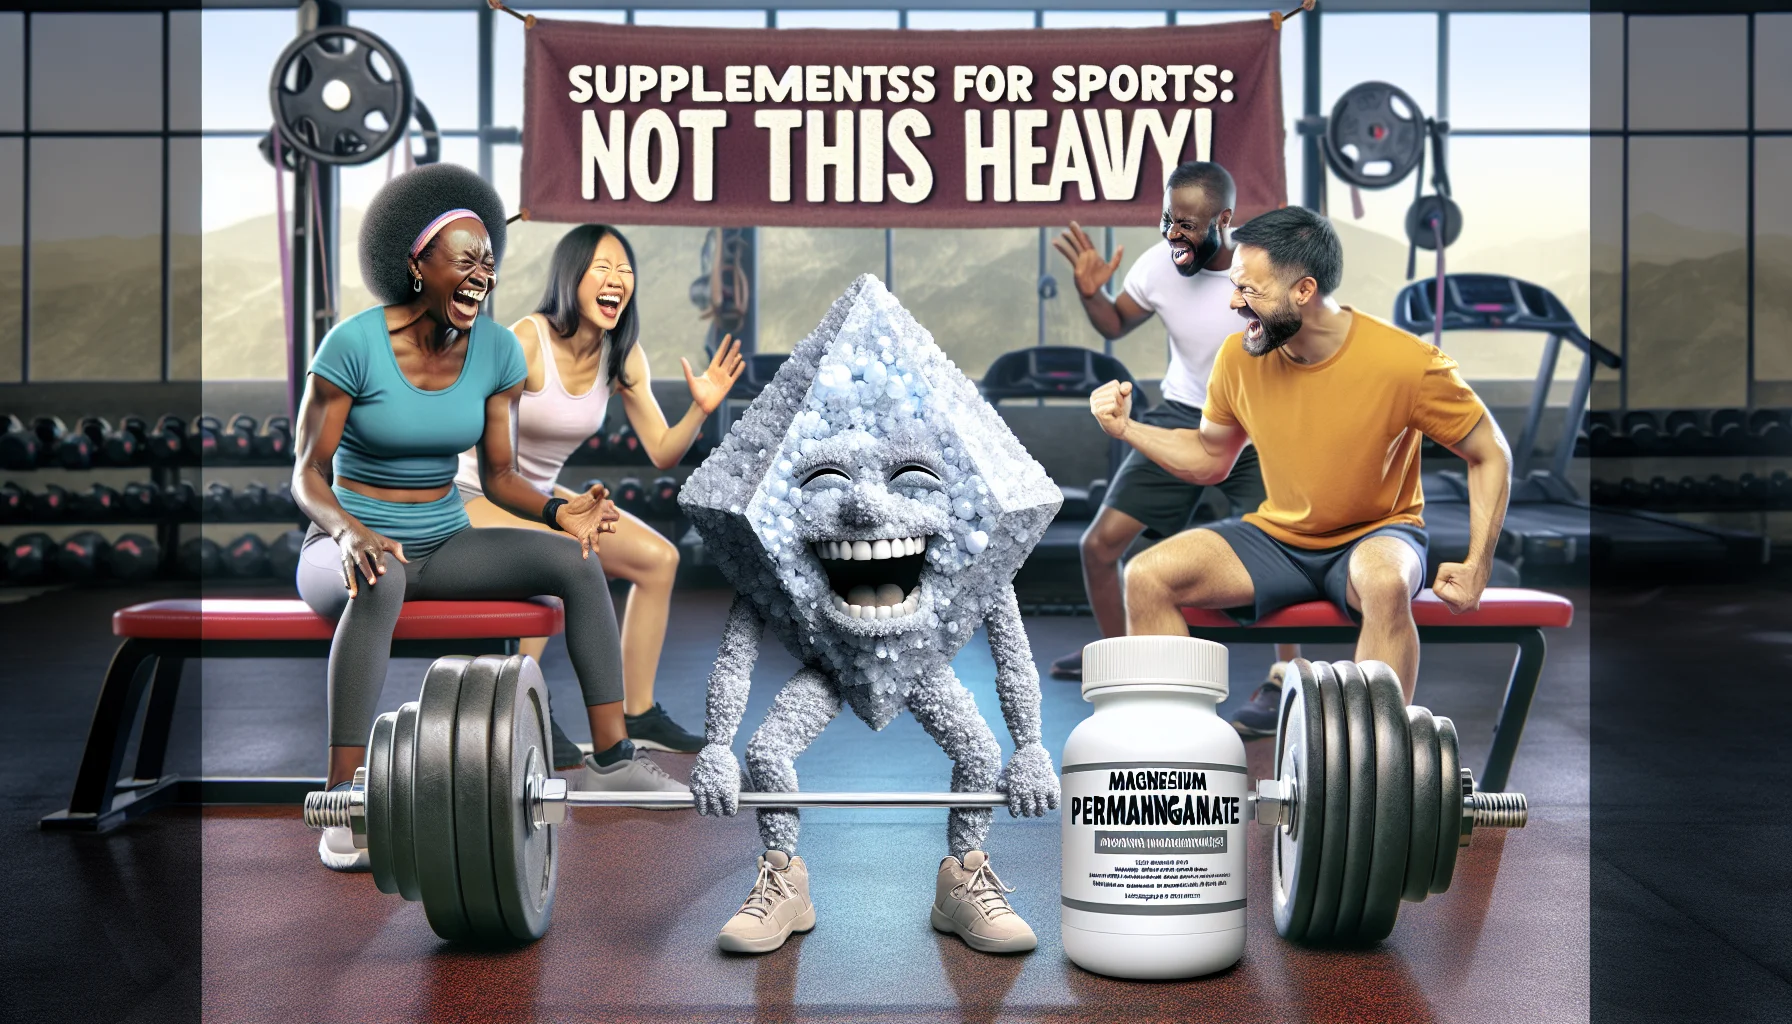 Create a witty and realistic image showcasing magnesium permanganate. The setting is a local gym where an animated crystal of the compound is seemingly attempting playful deadlifts, with visible struggle depicted in its facial expressions. On one side spectators, a Black woman and an Asian man, both professional trainers, are laughing gleefully. The backdrop is filled with sports paraphernalia like dumbbells, treadmills, and yoga mats. Underneath, overlay a text saying, 'Supplements for Sports: Not this Heavy!' to inspire people for judicious use of sports supplements.